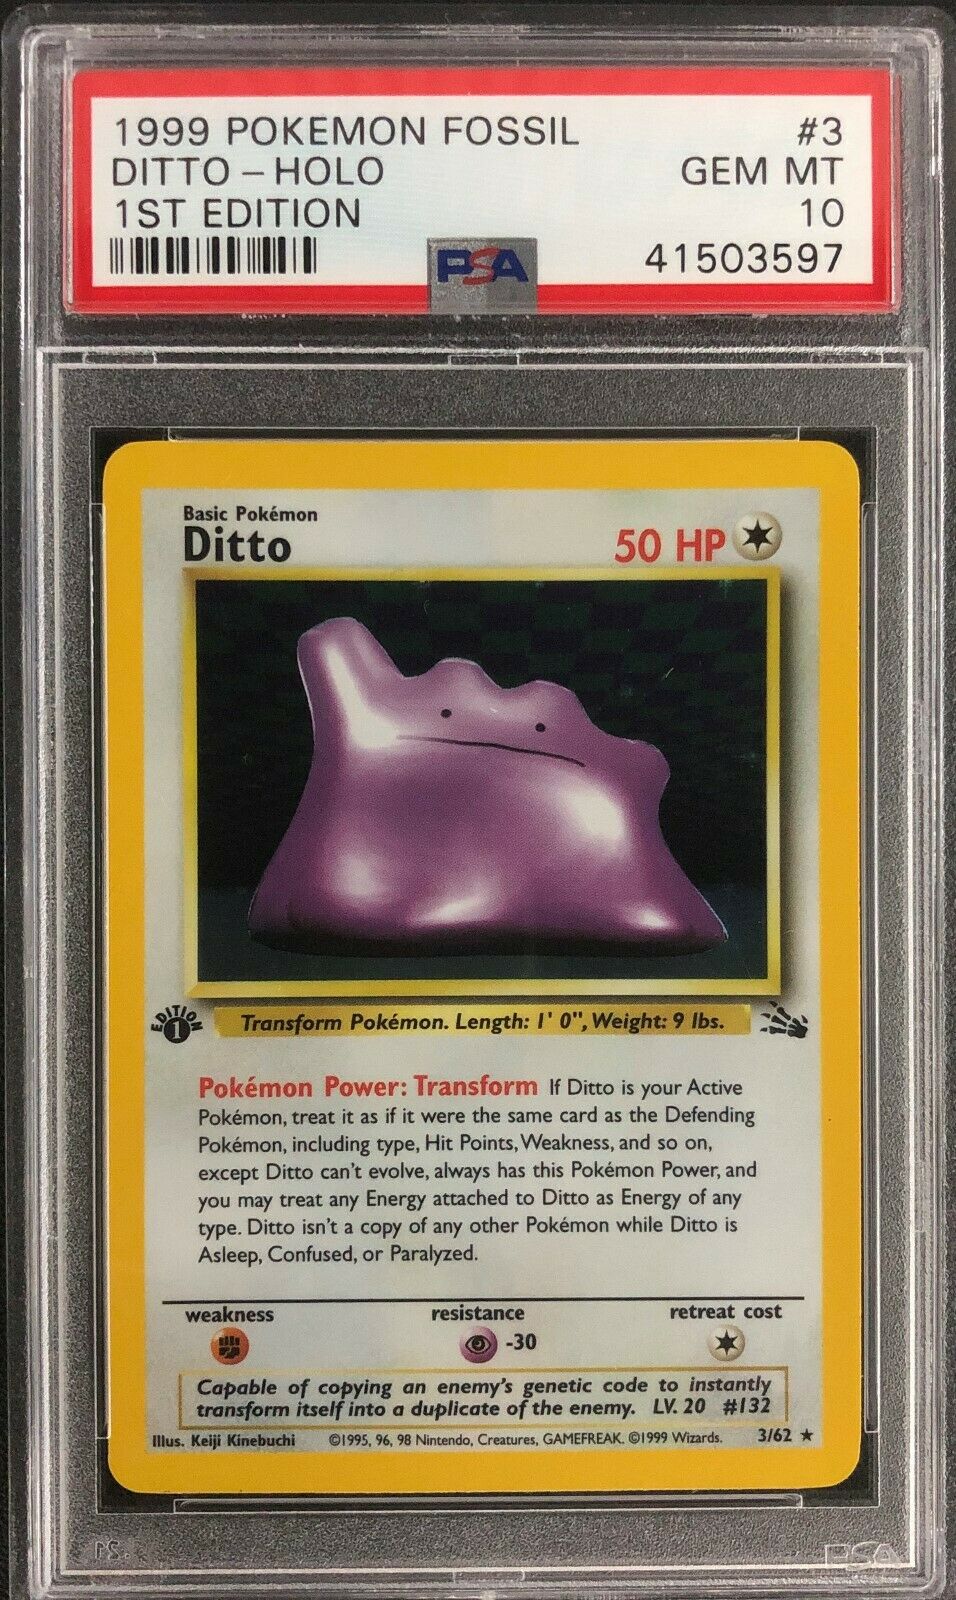 1st Edition Fossil Ditto Holo Pokemon Card Mint PSA 10